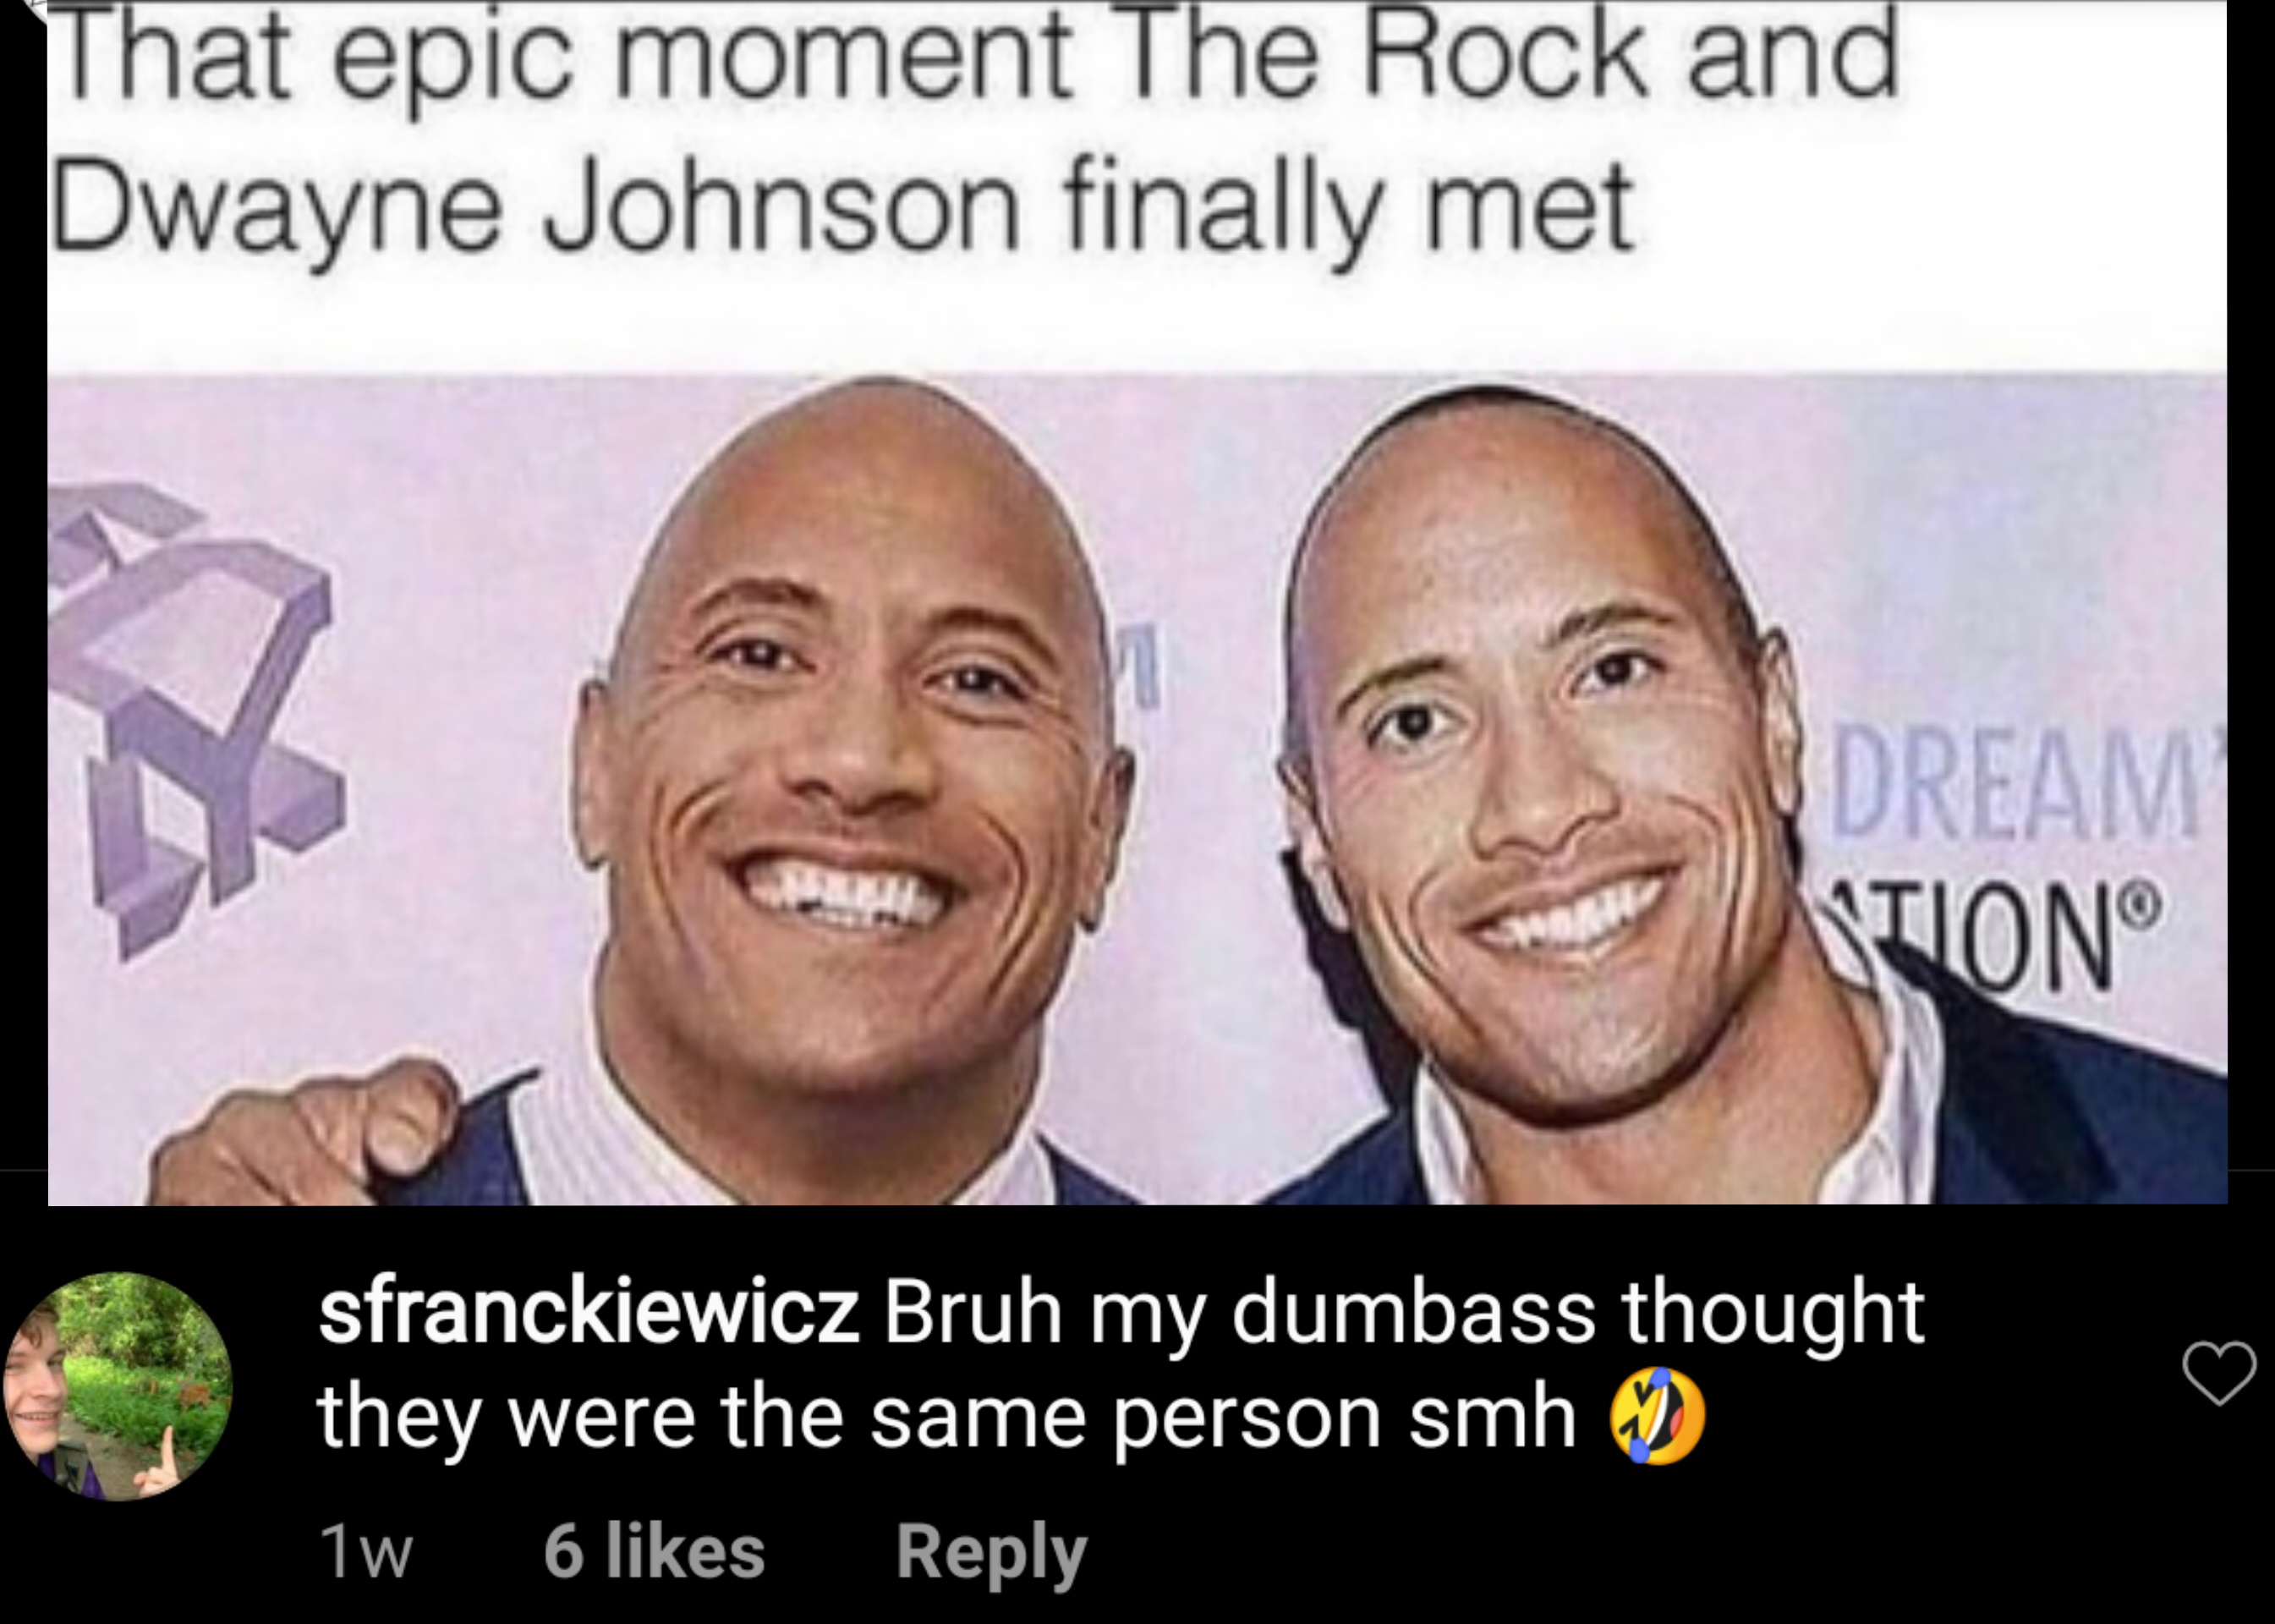 epic moment when dwayne johnson - That epic moment The Rock and Dwayne Johnson finally met Dream Stion sfranckiewicz Bruh my dumbass thought they were the same person smh 1w 6